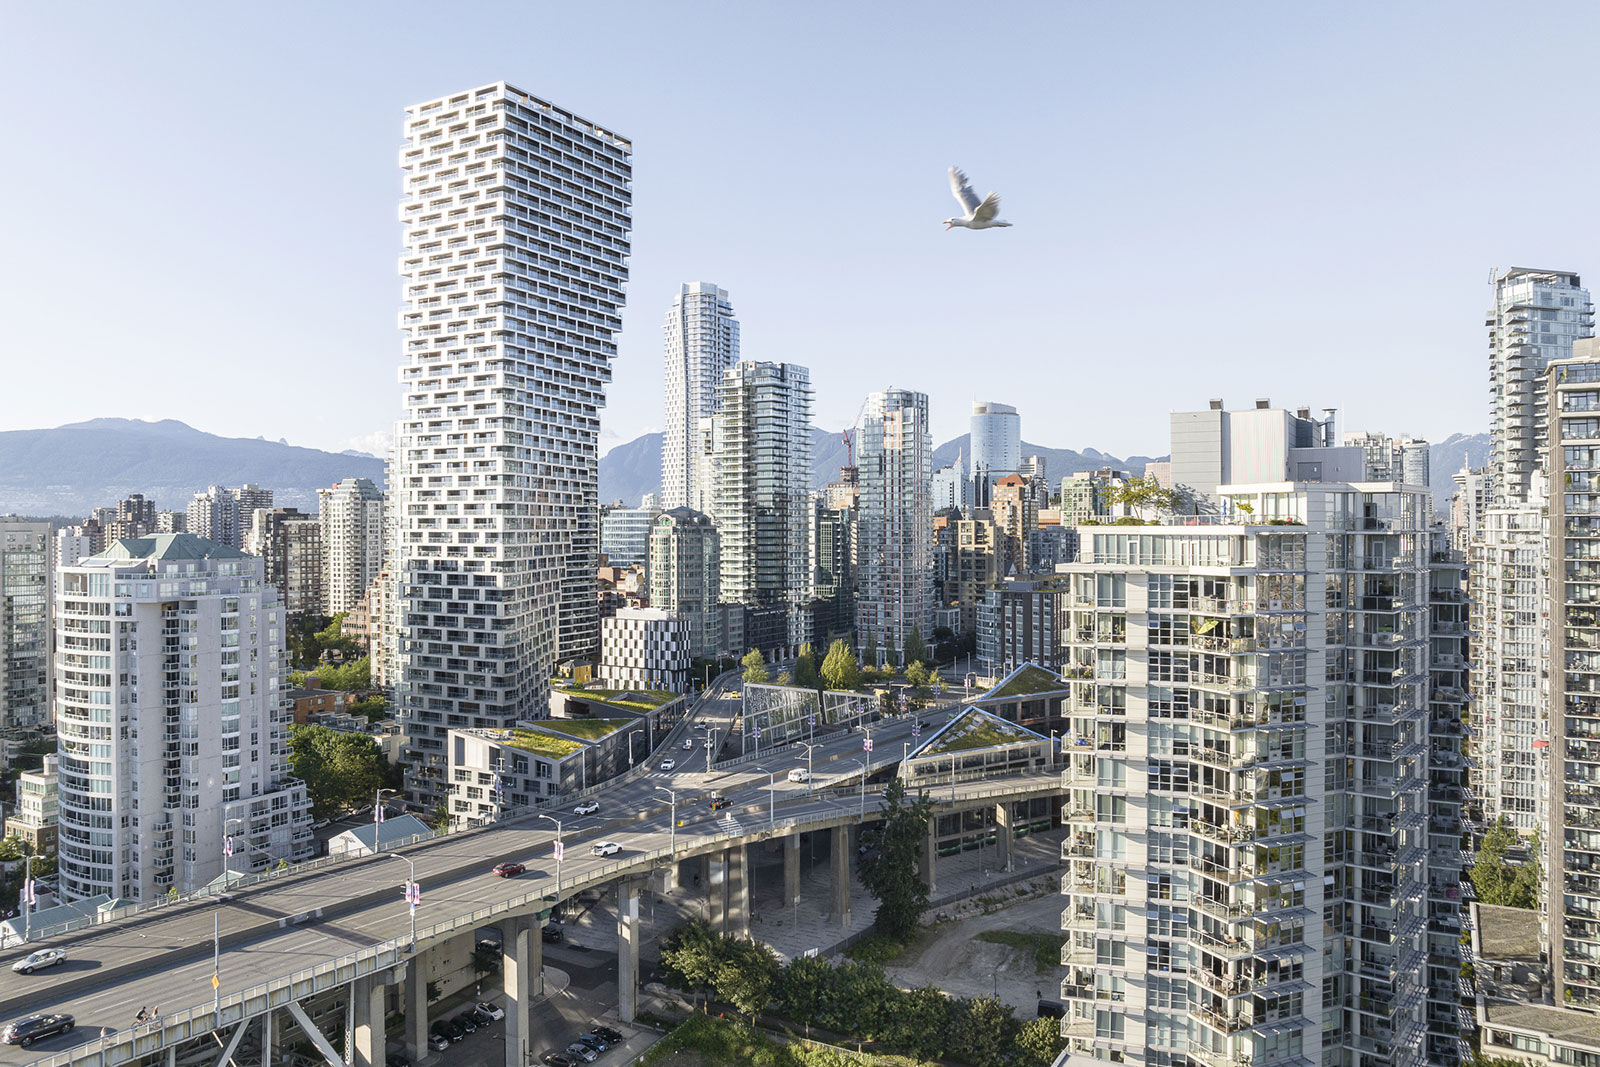 Vancouver House by BIG Architects: Sustainable Urban Design & Architectural Innovation